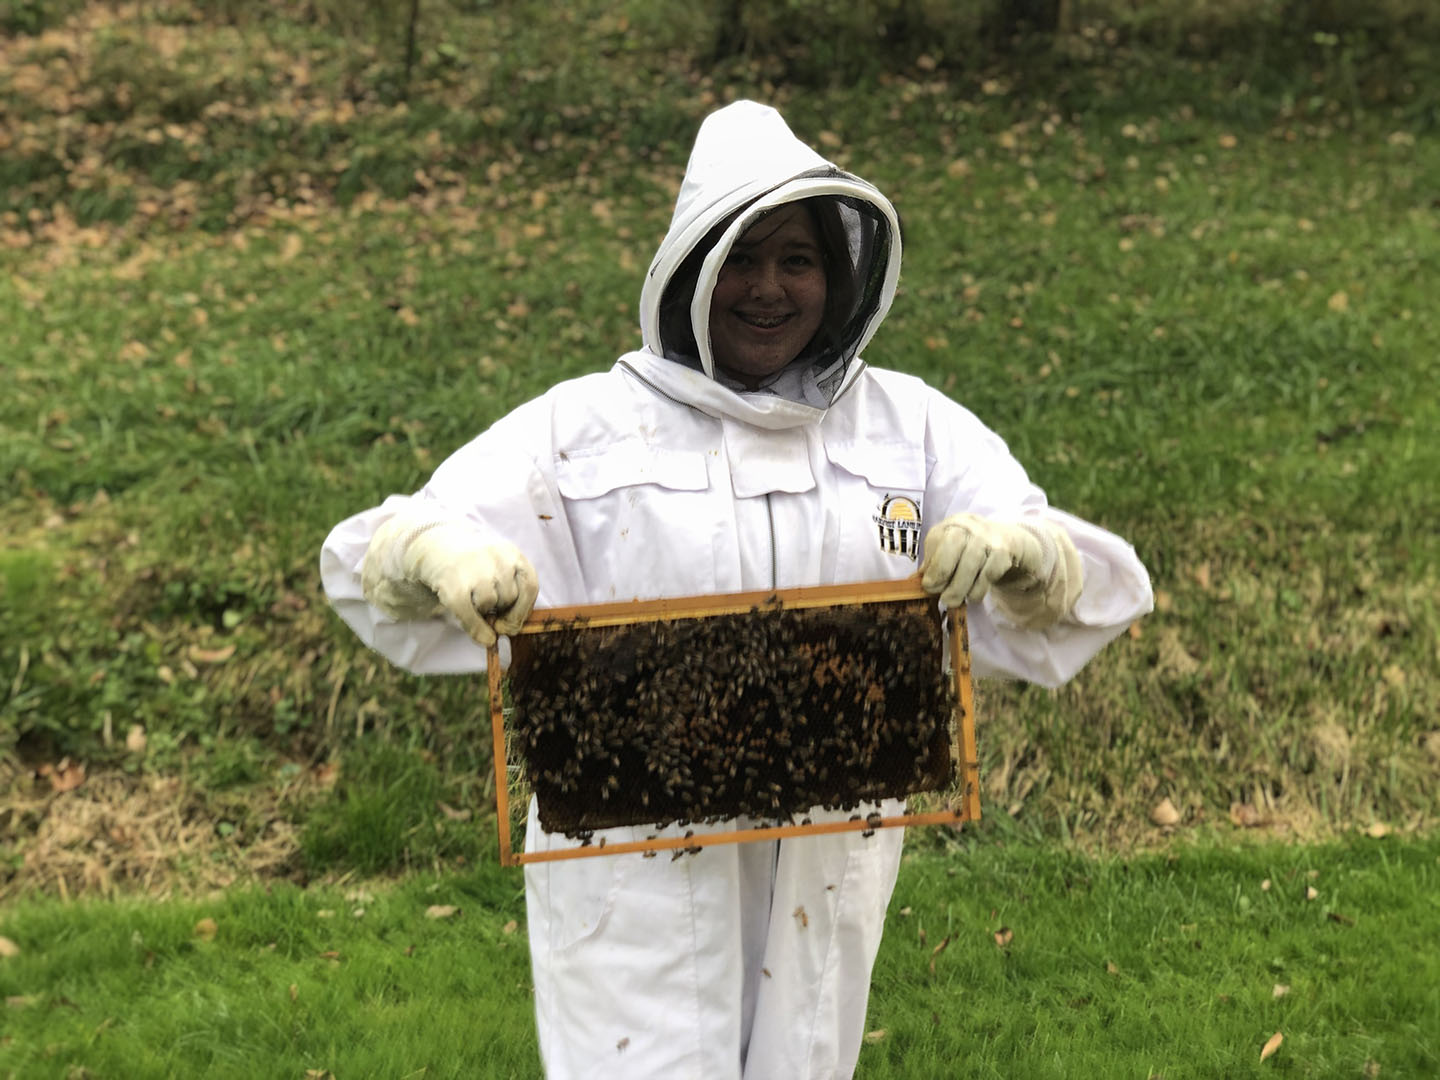 Picture of Emma Stevens wearing a beekeepers outfit and holding a rack from her hive filled with bees.